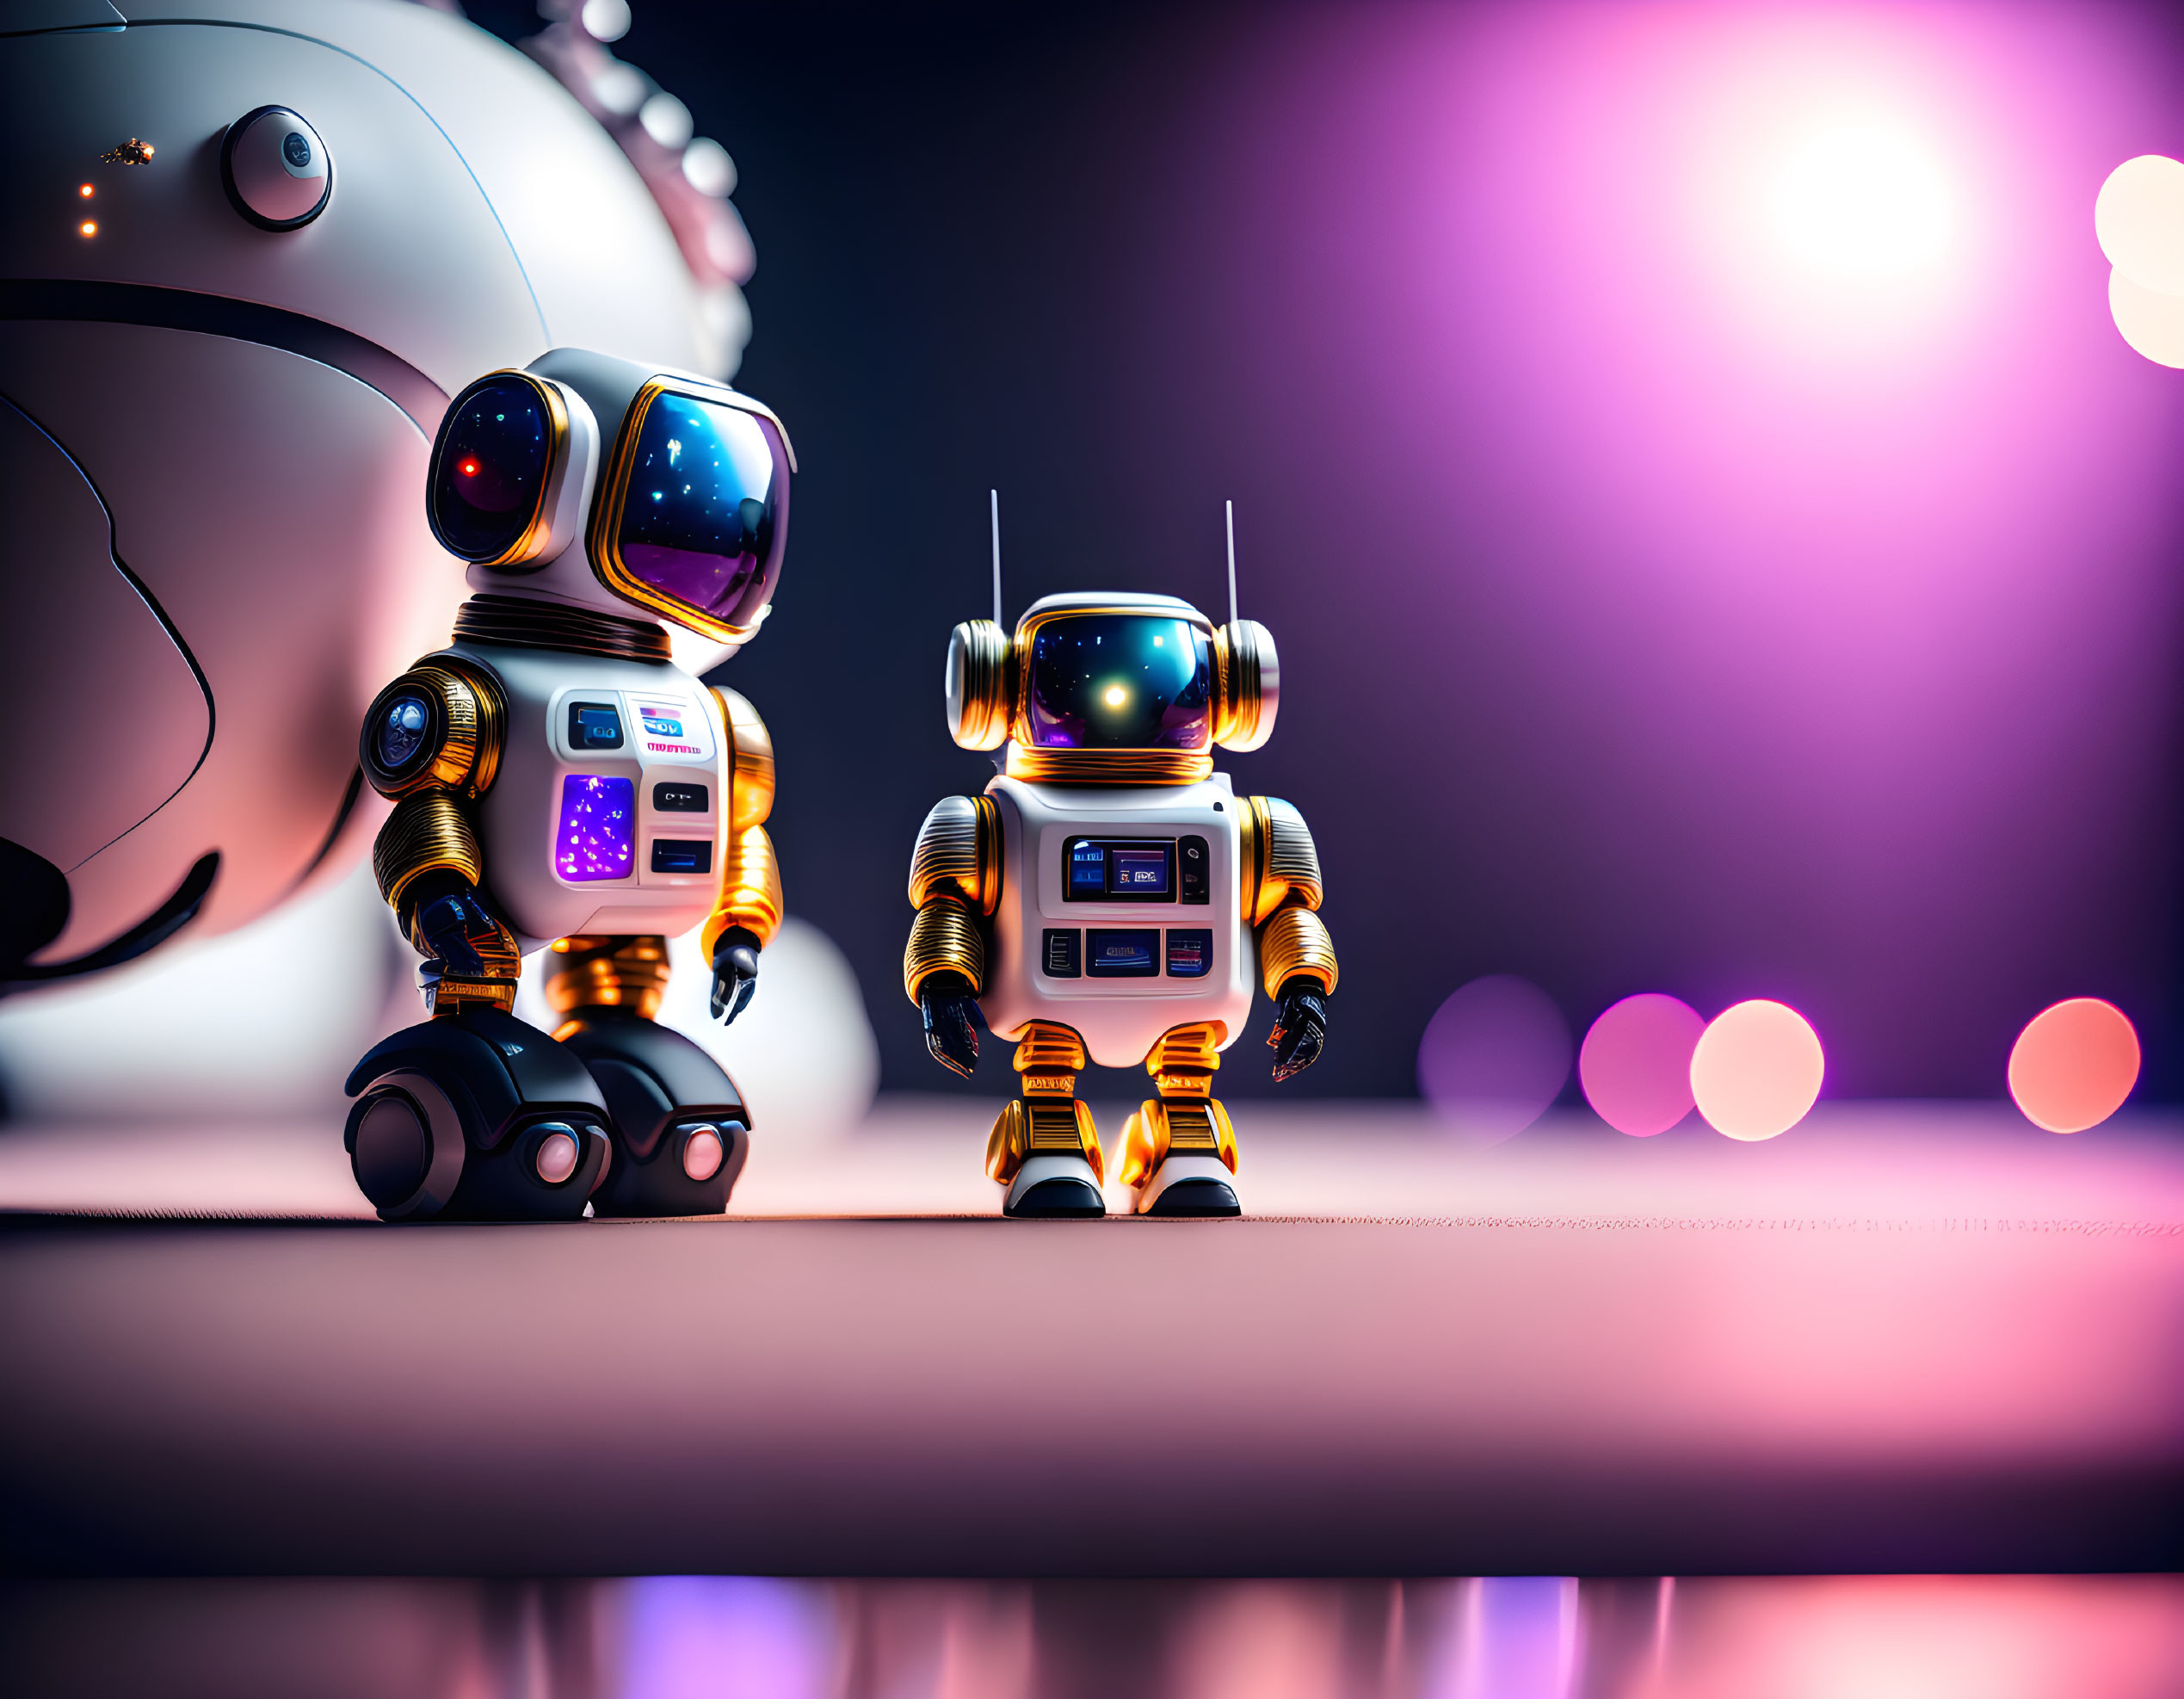 Futuristic robots with screen faces and gold accents under vibrant lights